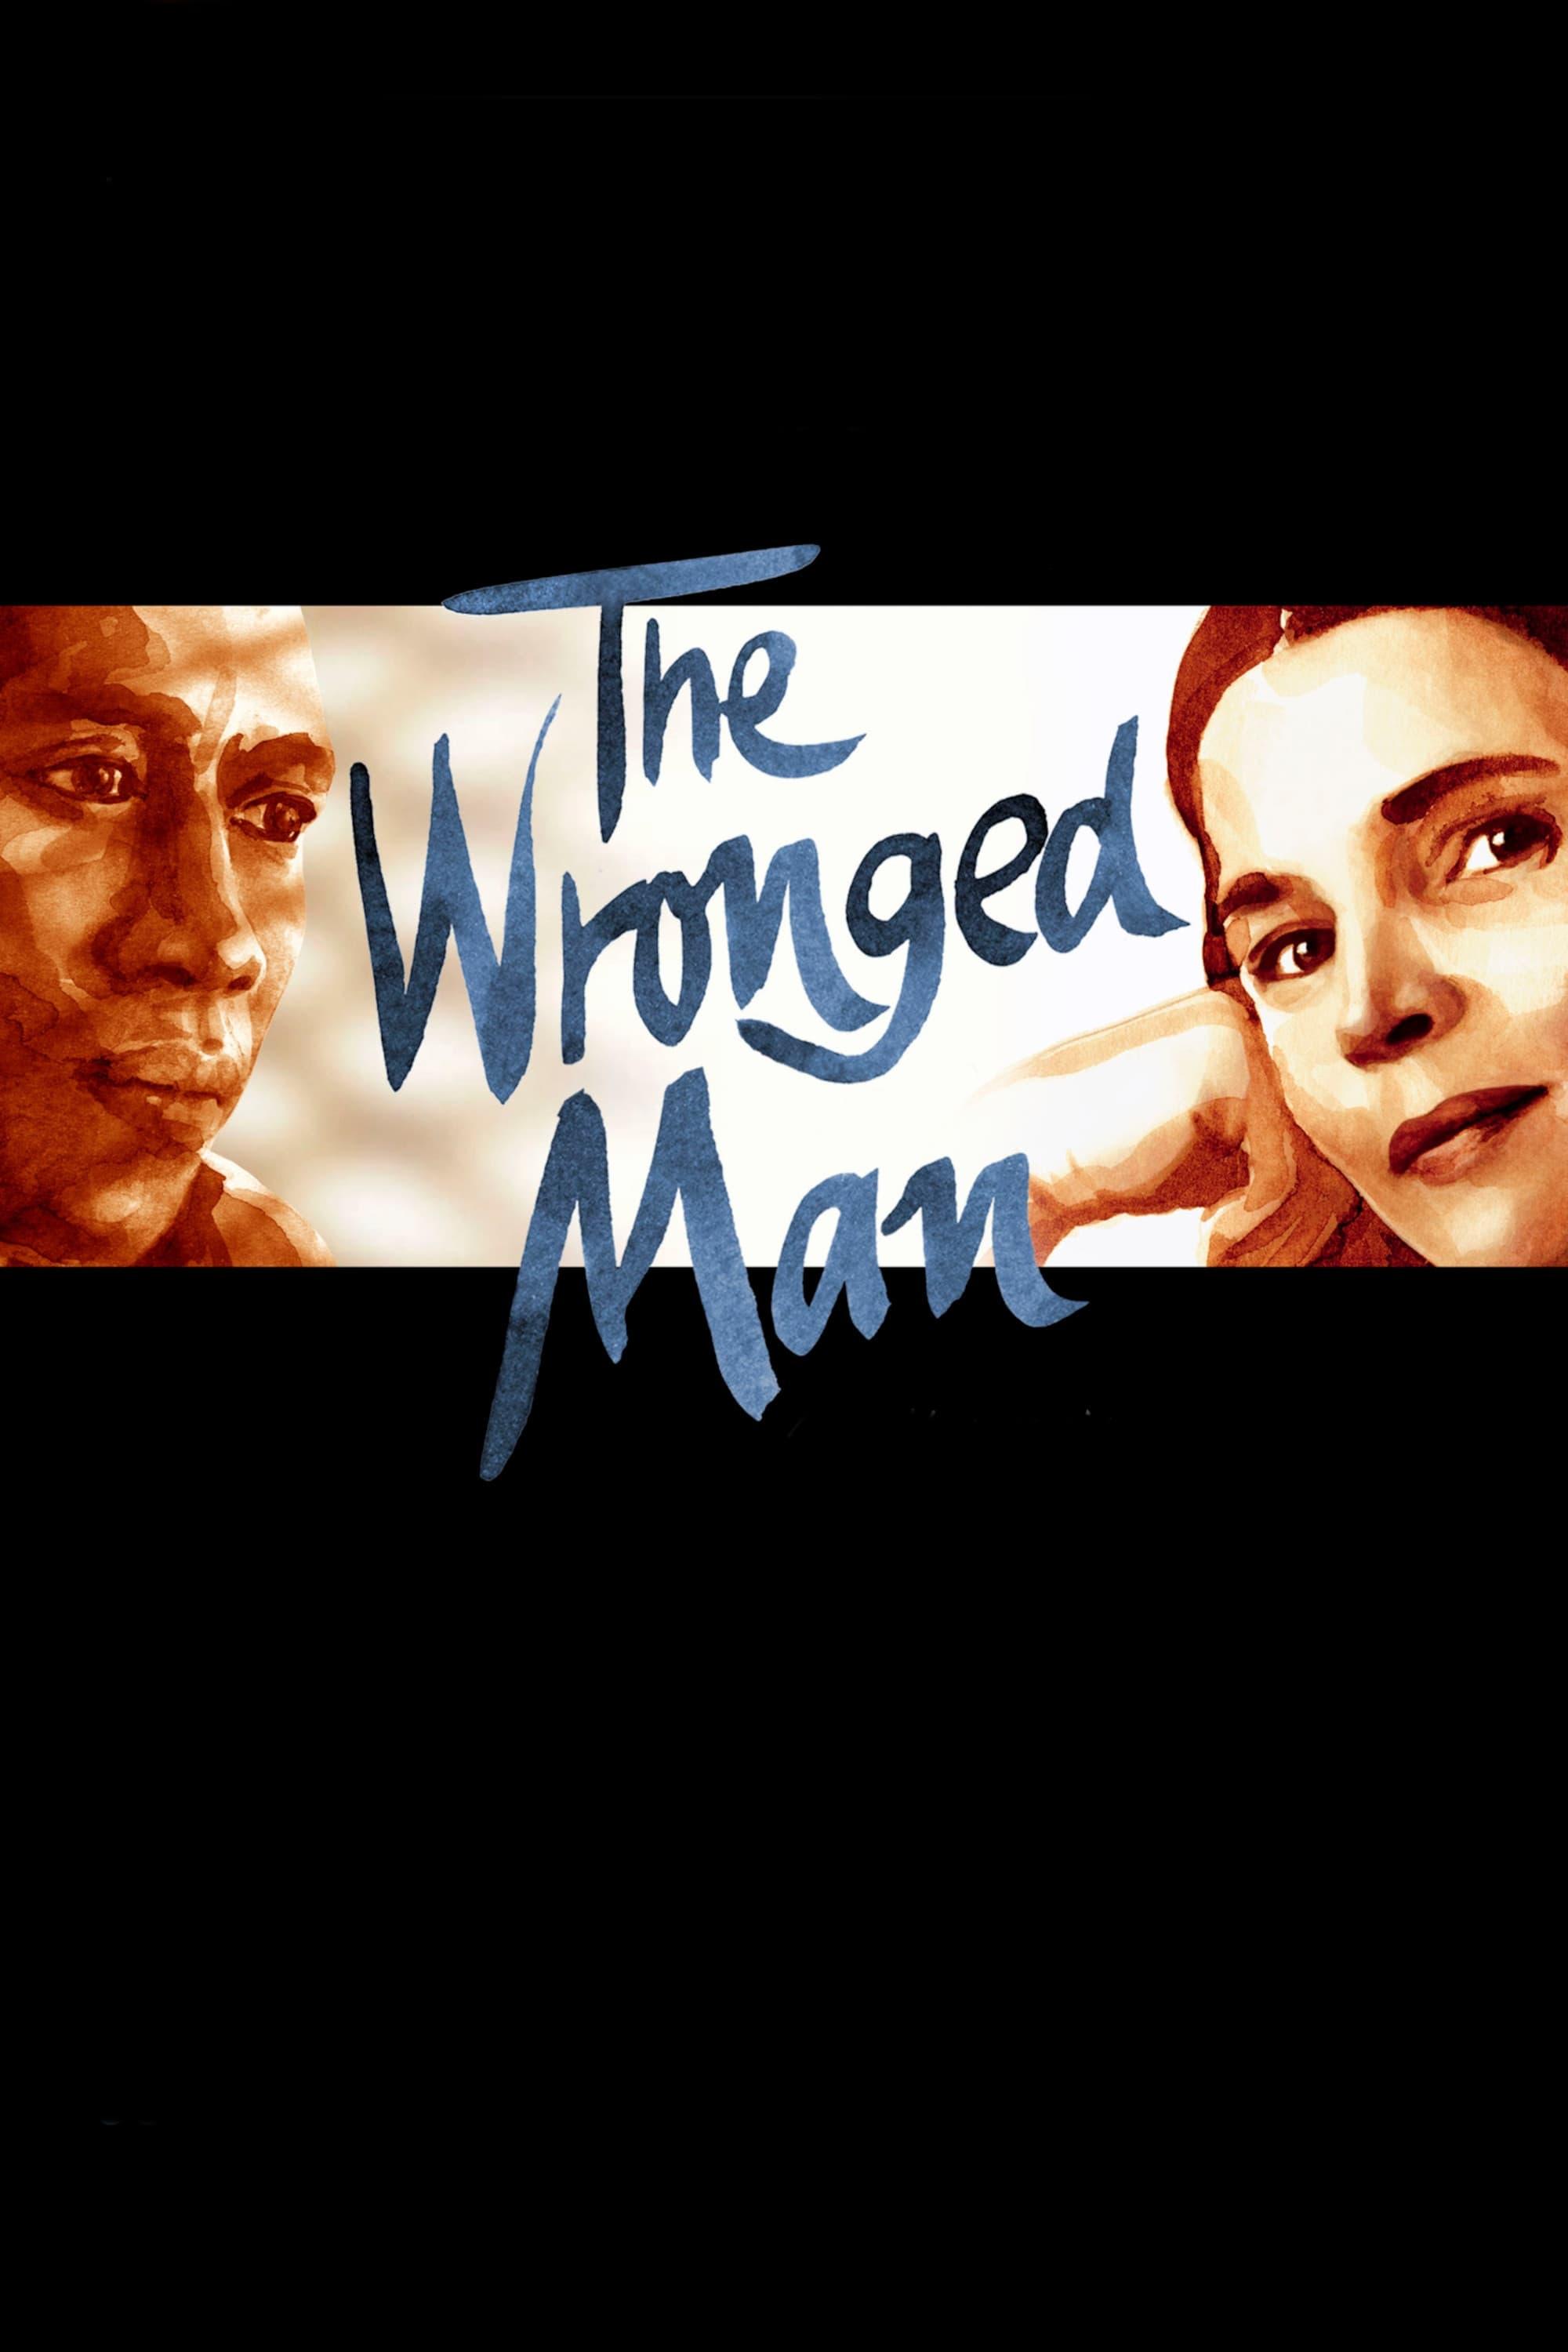 The Wronged Man poster